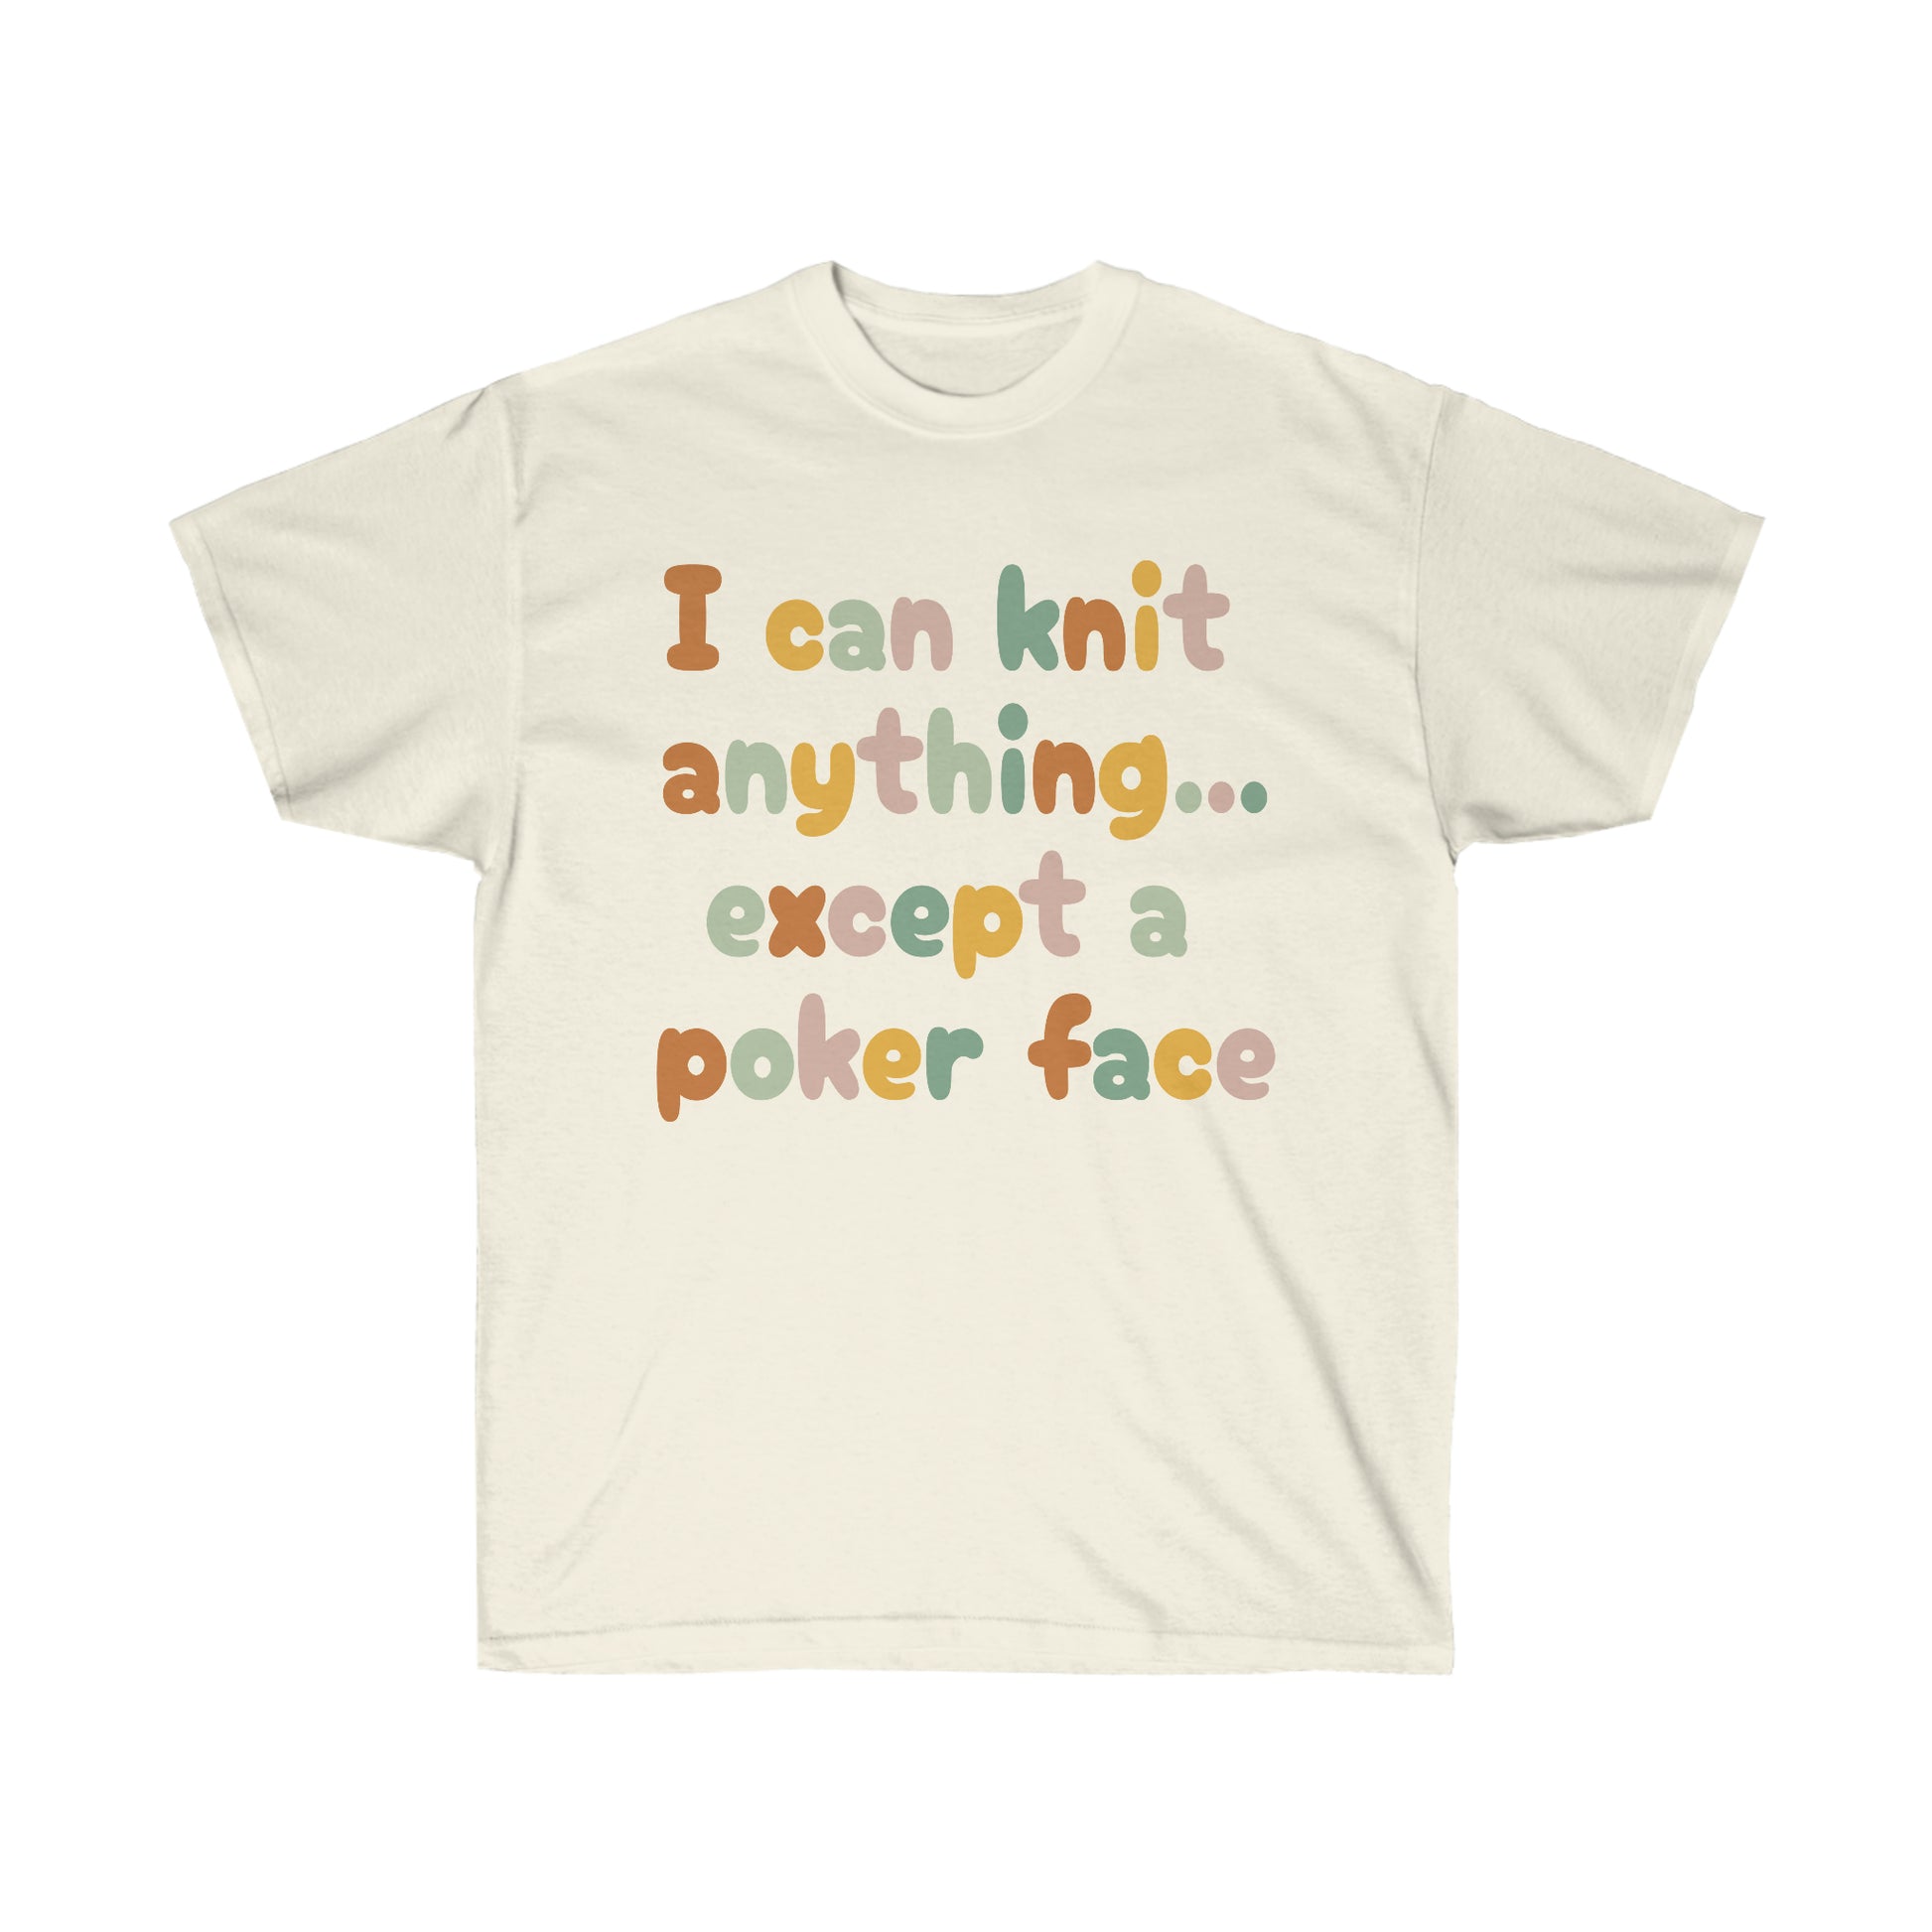 I can knit anything...except a poker face T Shirt - PeppaTree Design Store